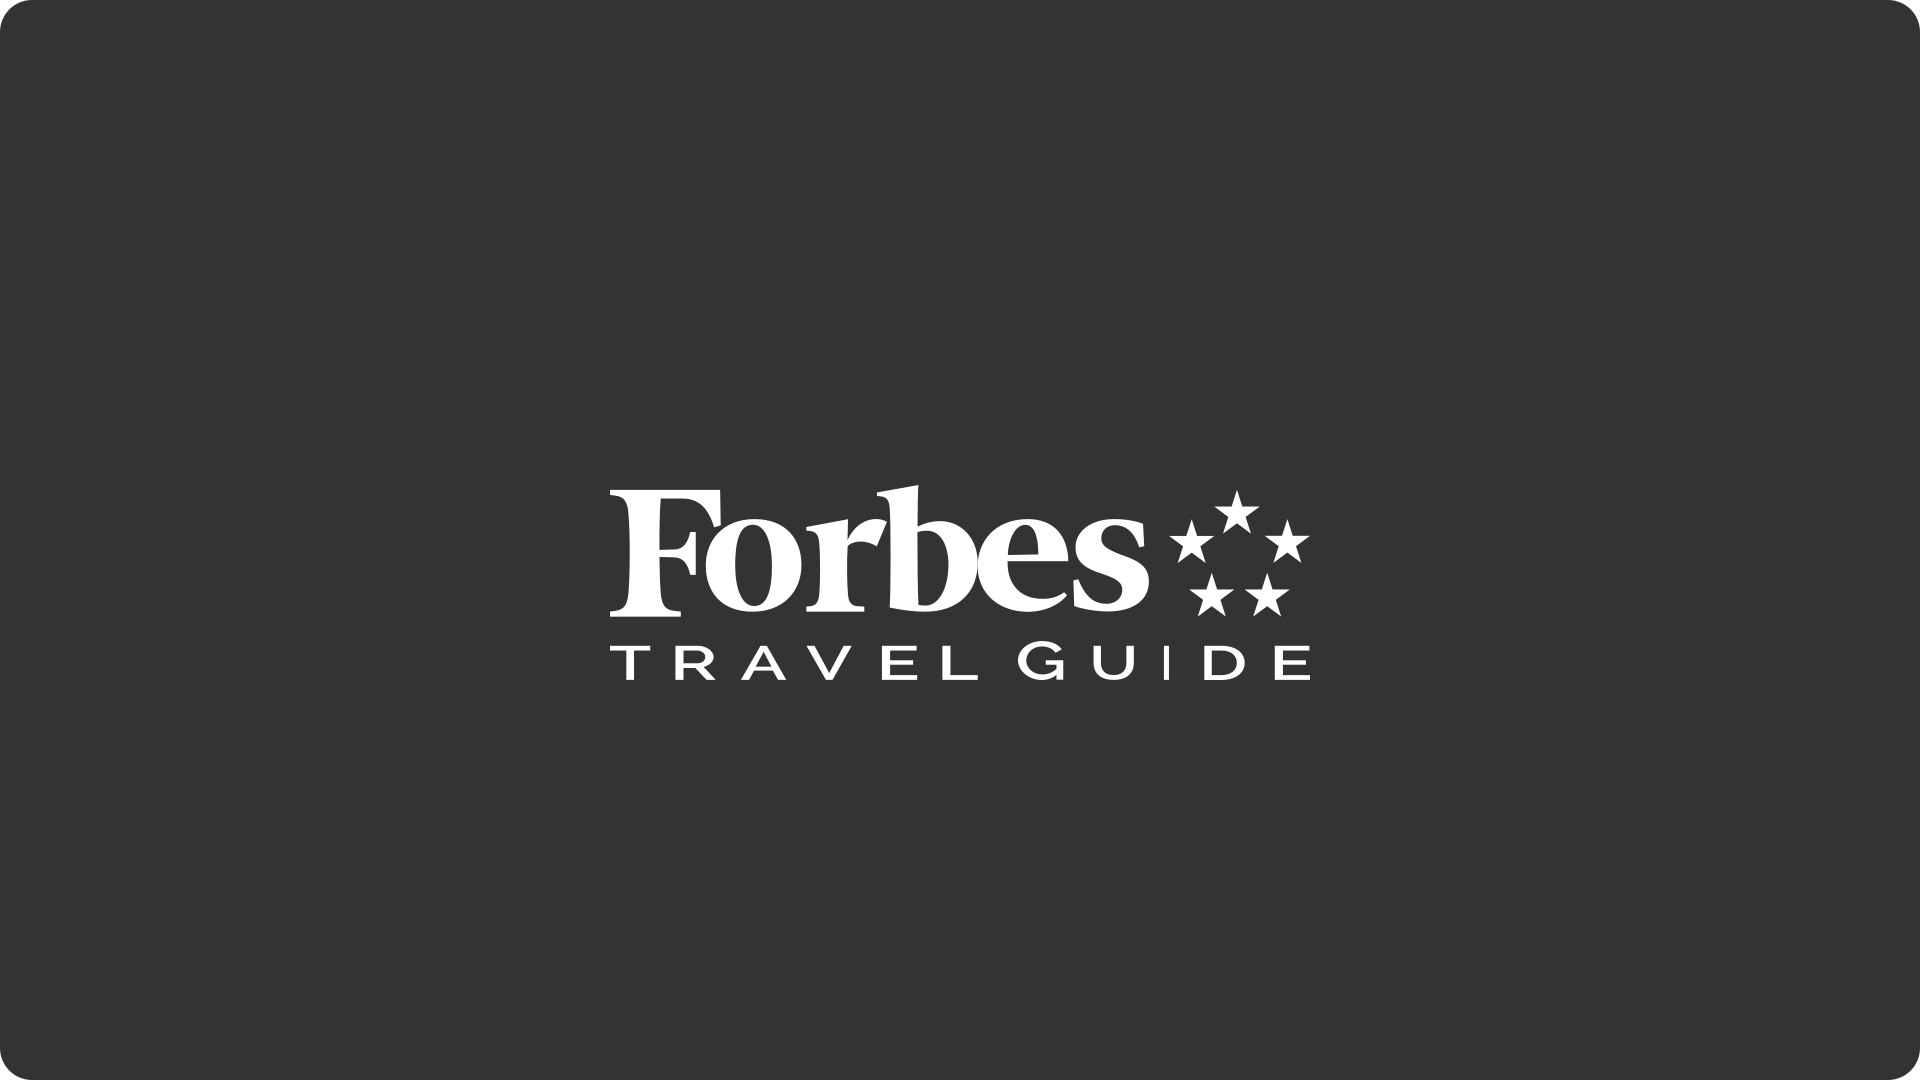 Selfbook Selected as Forbes Travel Guide’s Official Digital Wallet Provider 2022